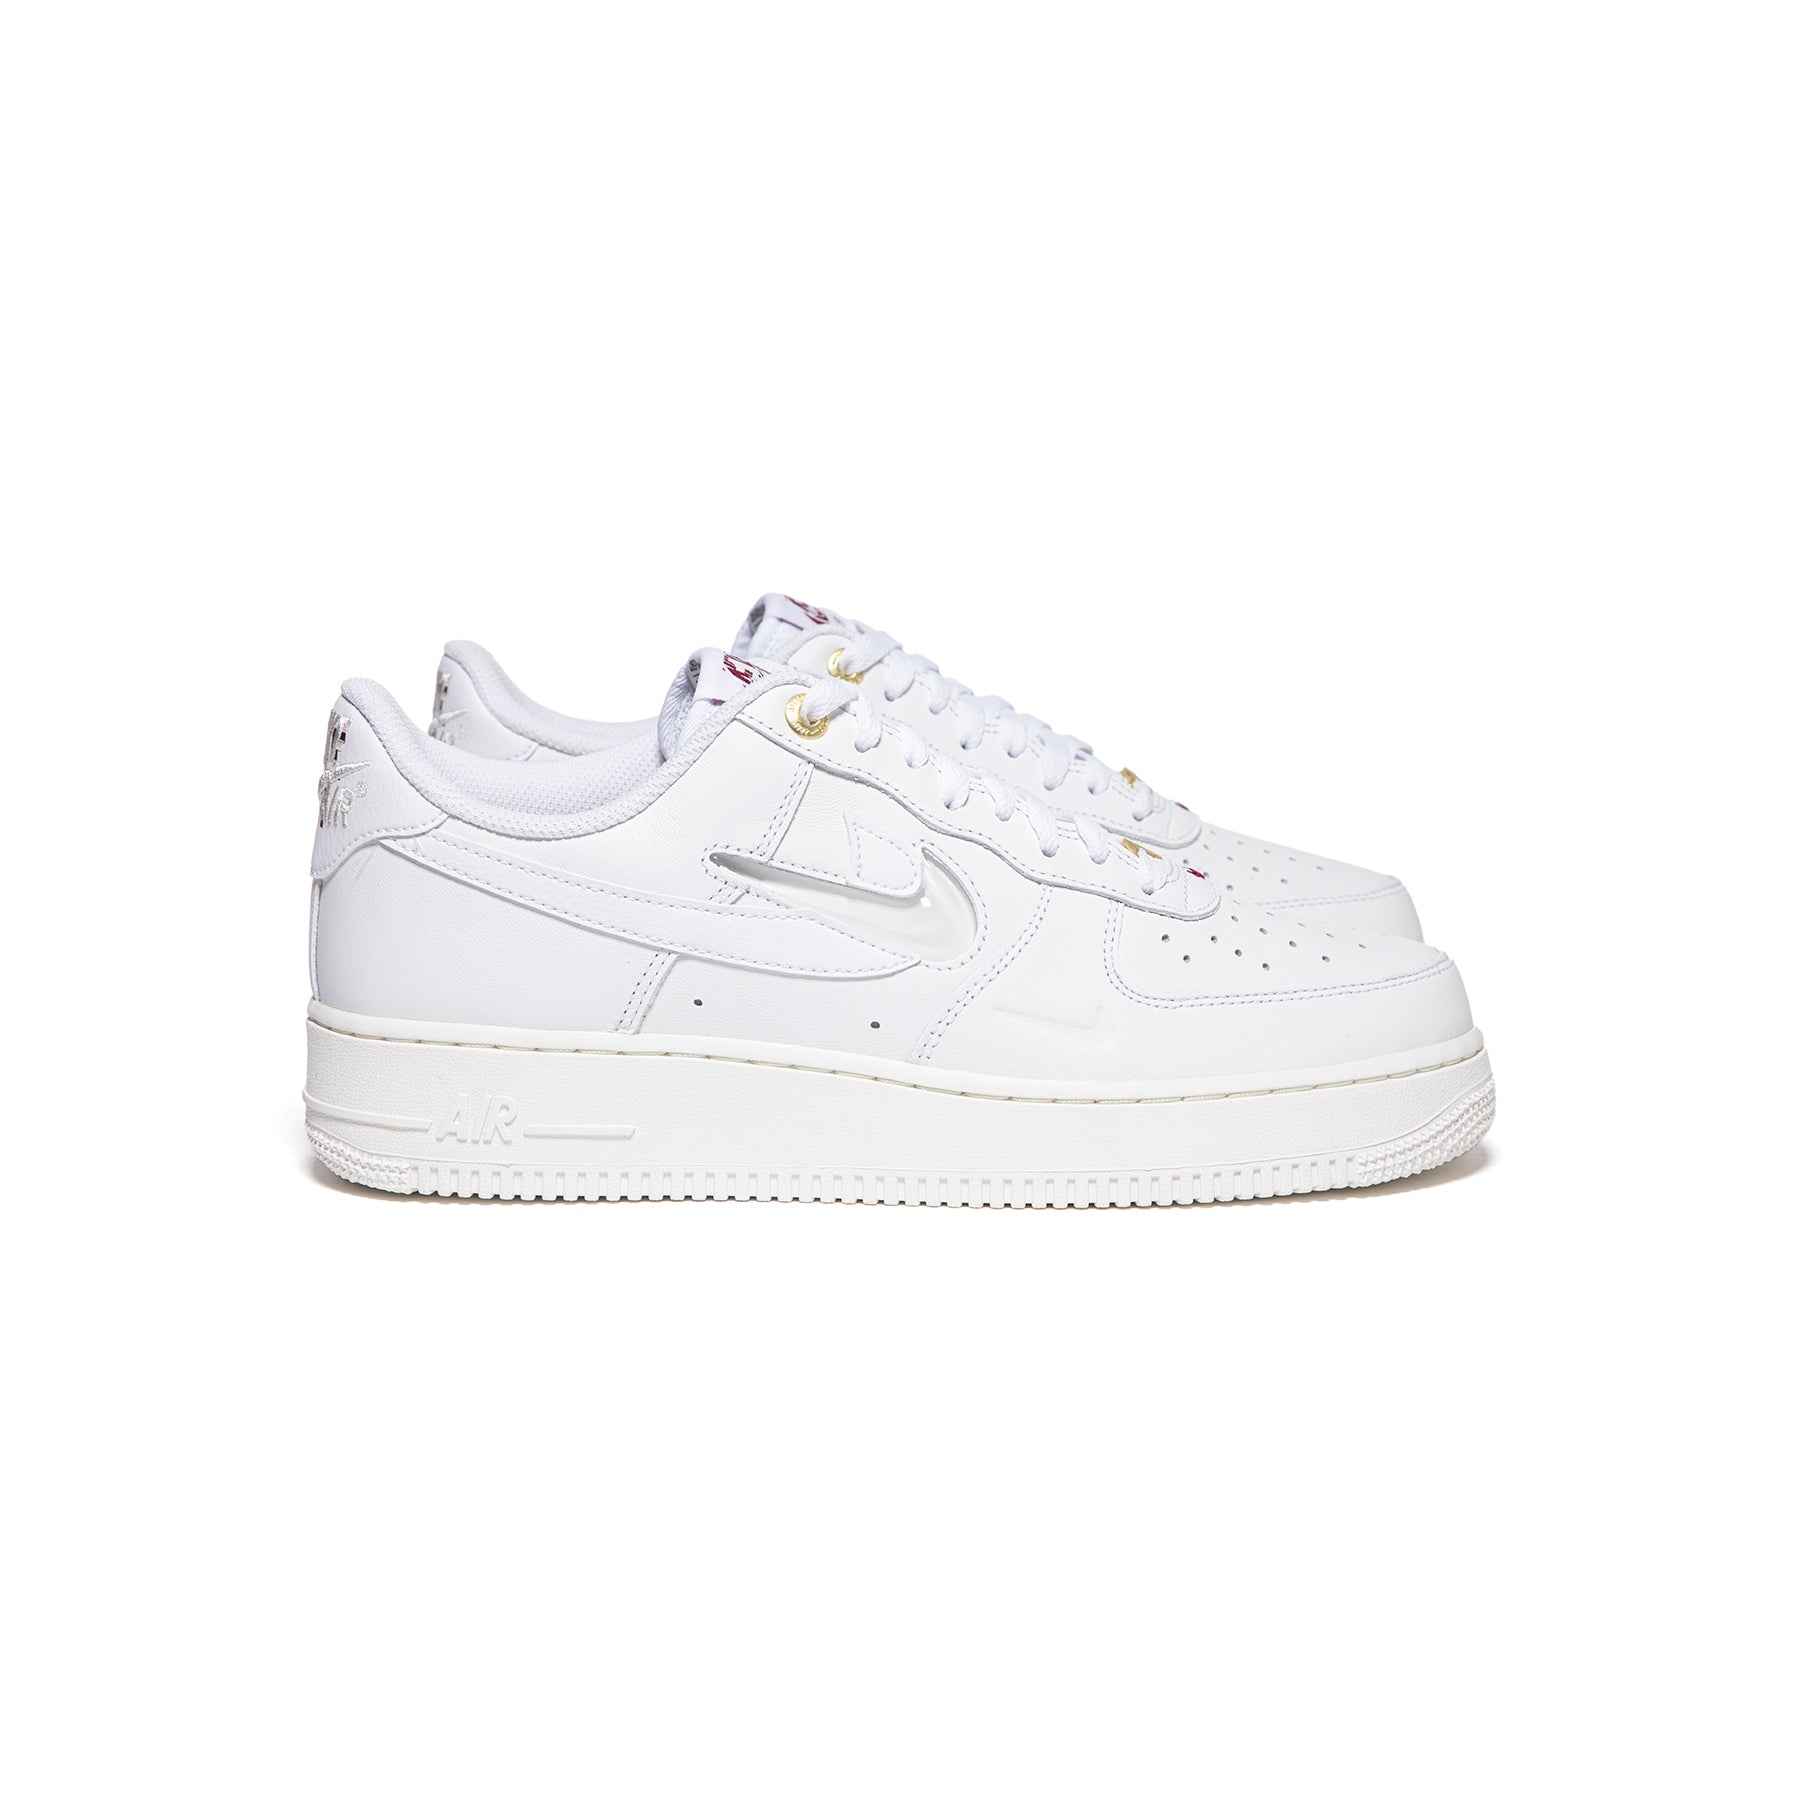 is genoeg Hijsen passend Nike Air Force 1 '07 PRM (White/Sail/Team Red) – Concepts